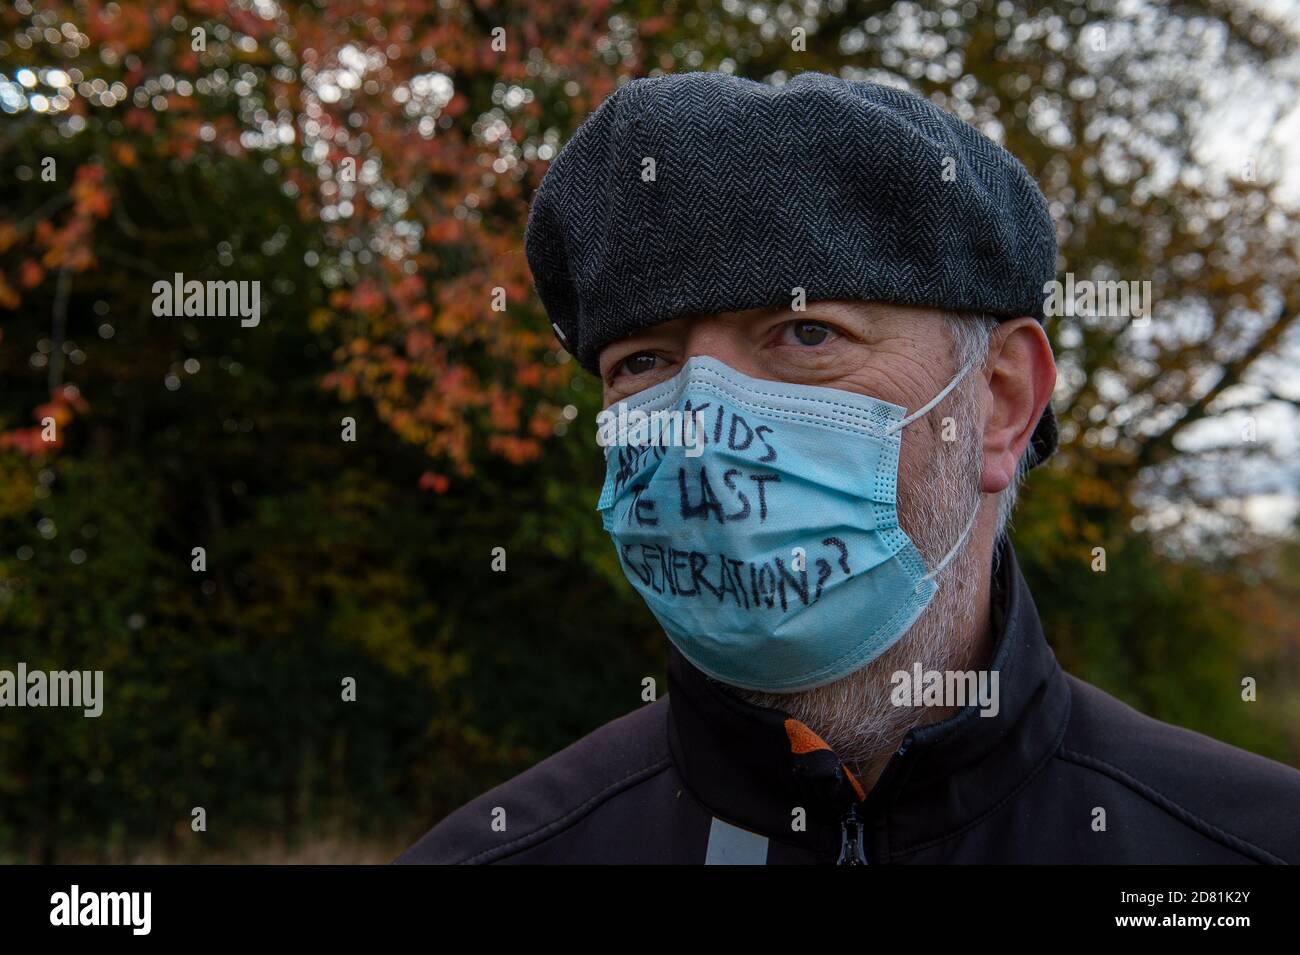 Aylesbury Vale, Buckinghamshire, UK. 26th October, 2020. A protester wears an are out kids the last generation facemask. HS2 are continuing to fell ancient woodland at Grim's Ditch in Buckinghamshire this morning. Anti HS2 environmental campaigners allege that HS2 do not have a bat licence for felling in these ancient woodlands and so are potentially committing a wildlife crime. They have reported the matter to the Police again this morning an are awaiting a response. Construction of the High Speed Rail from London to Birmingham puts 108 ancient woodlands, 33 SSSIs and 693 wildlife sites at ri Stock Photo